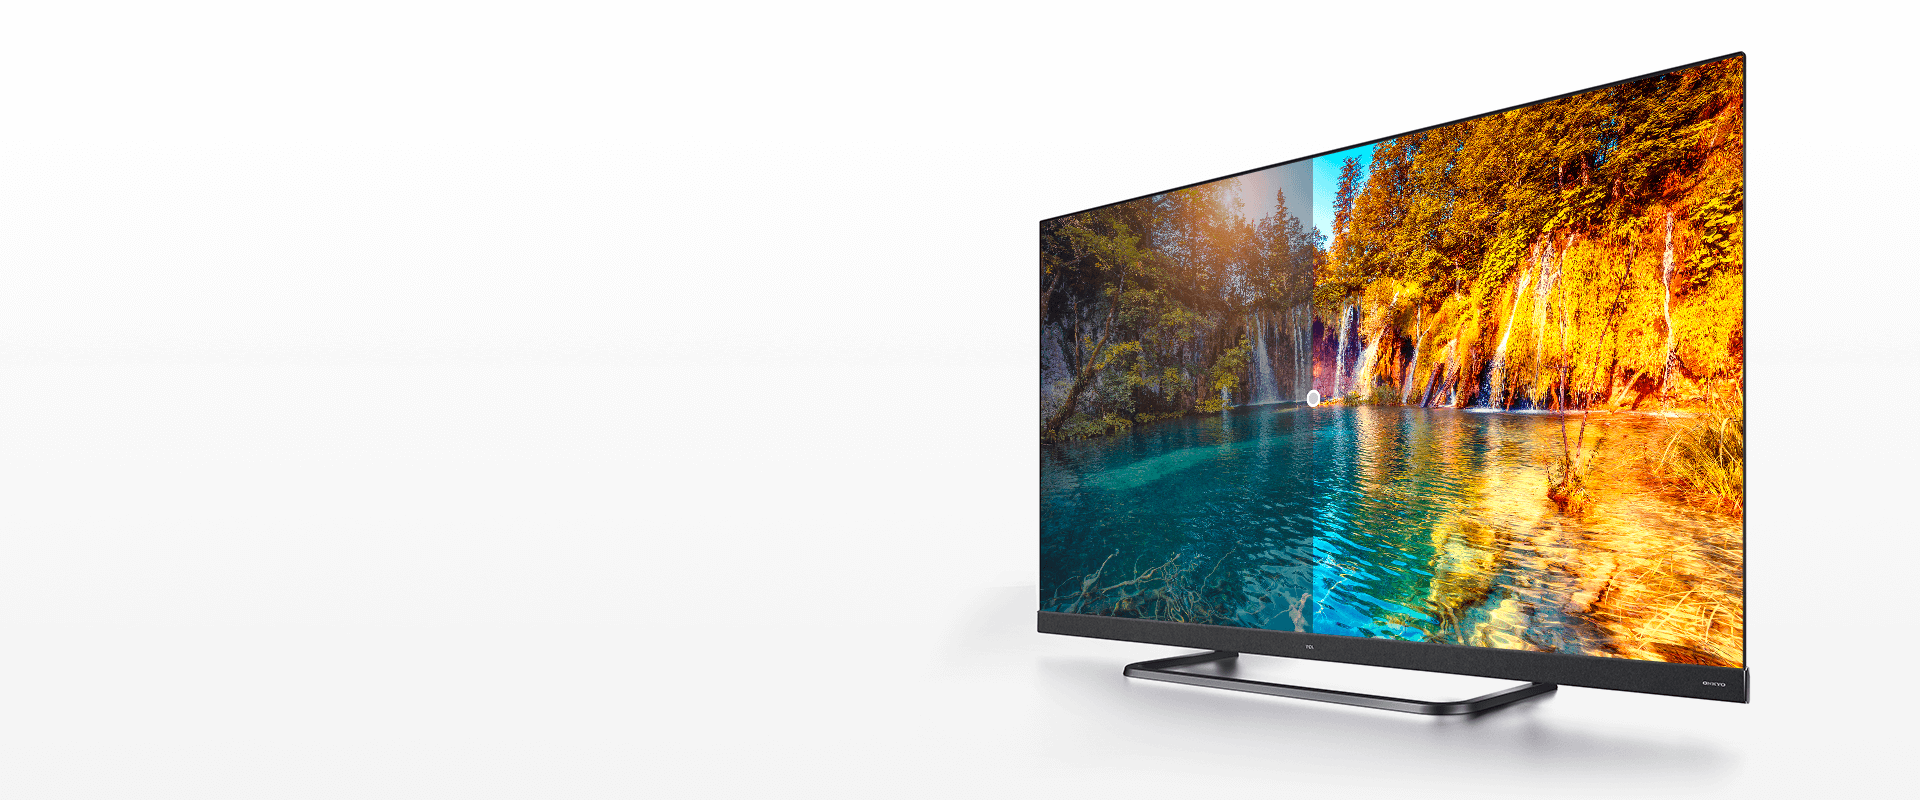 Don't miss any detail with your 4K HDR 10+ TCL TV